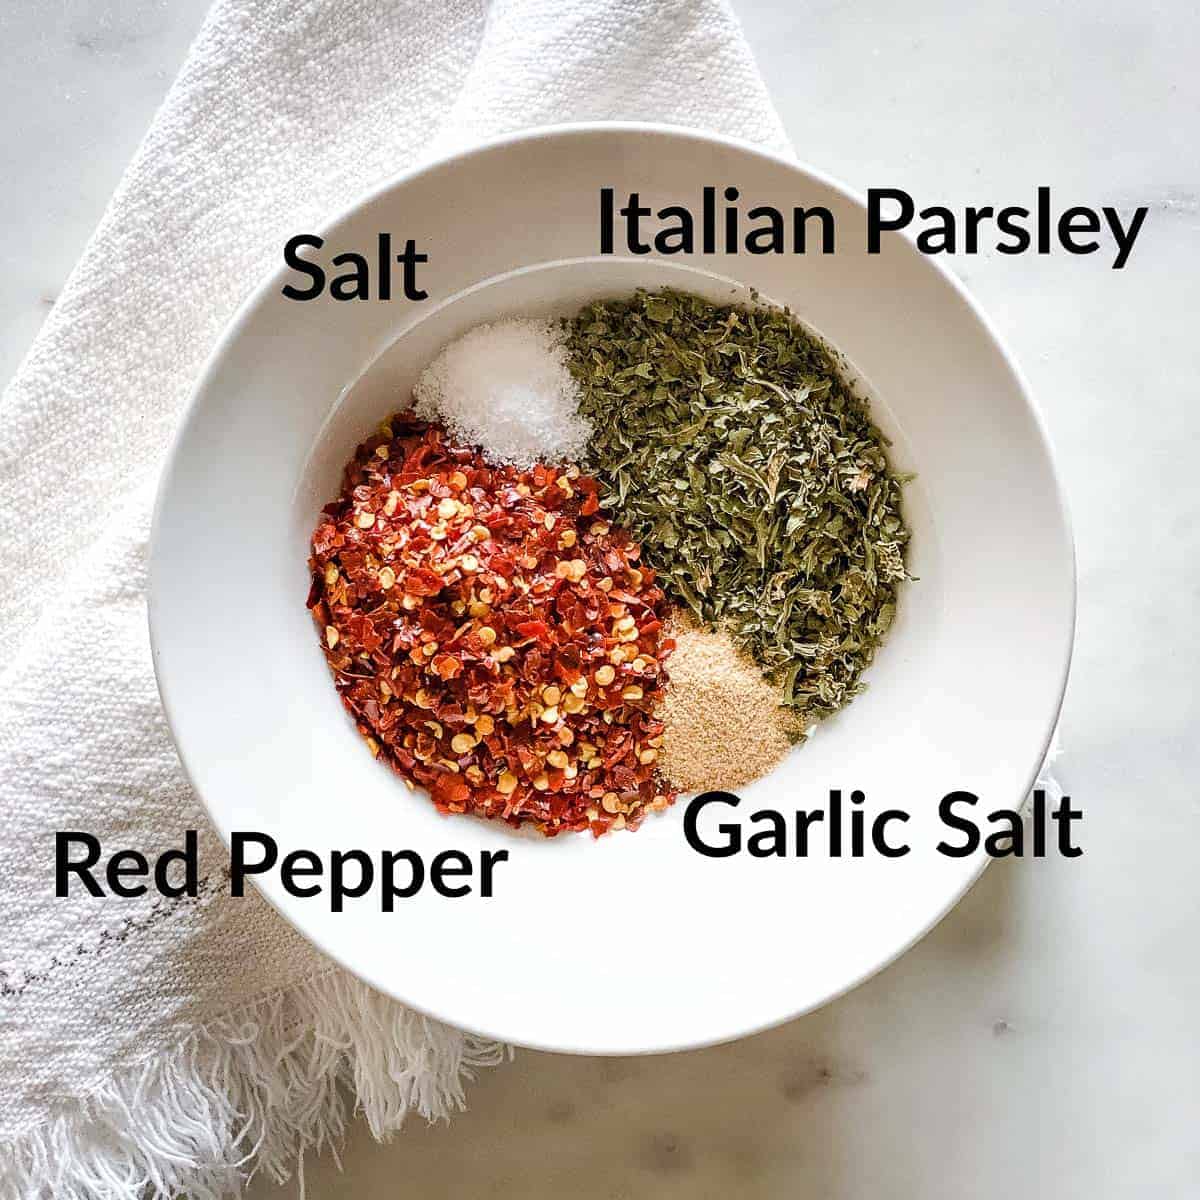 White bowl with Italian Seasoning spices arranged in a circle and labeled clockwise from top: Italian Parsley, Garlic Salt, Red Pepper, and Salt. Bowl is placed on a off white, fringed napkin on a white marble background.